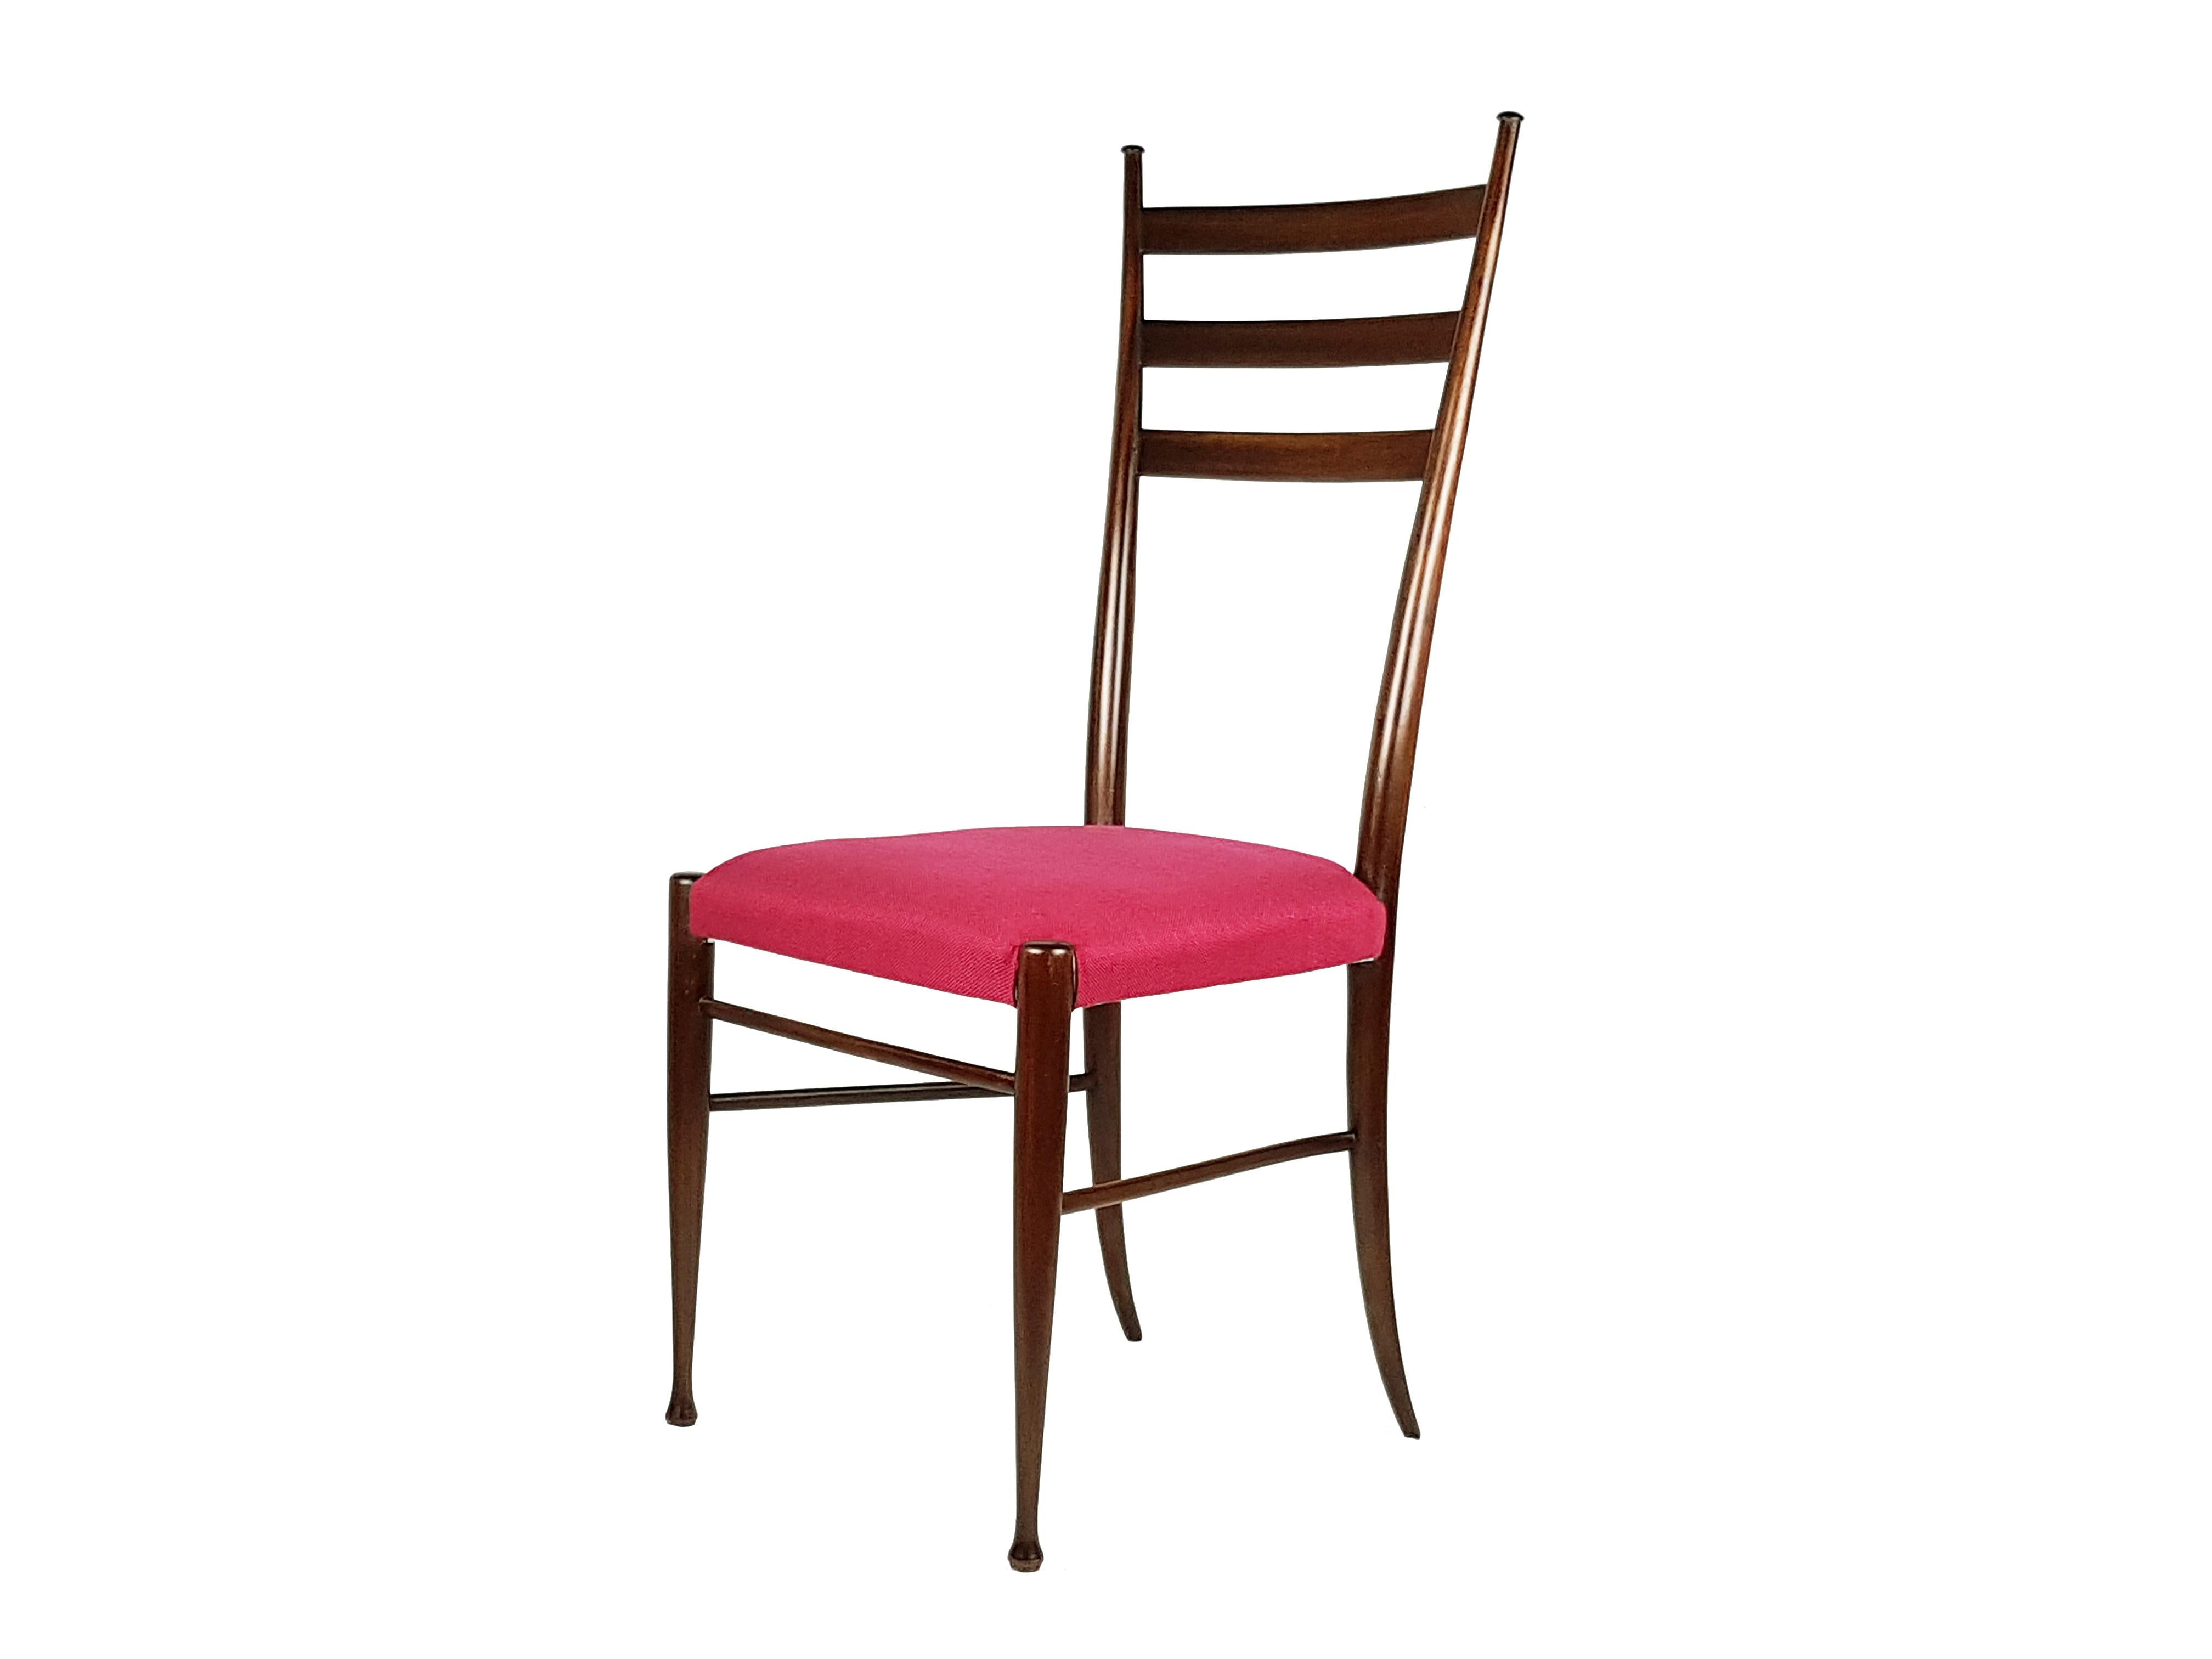 High back dining chairs with magenta fabric seats. The 4 chairs have been restored and reupholstered.
The price is referred to the set of 4.